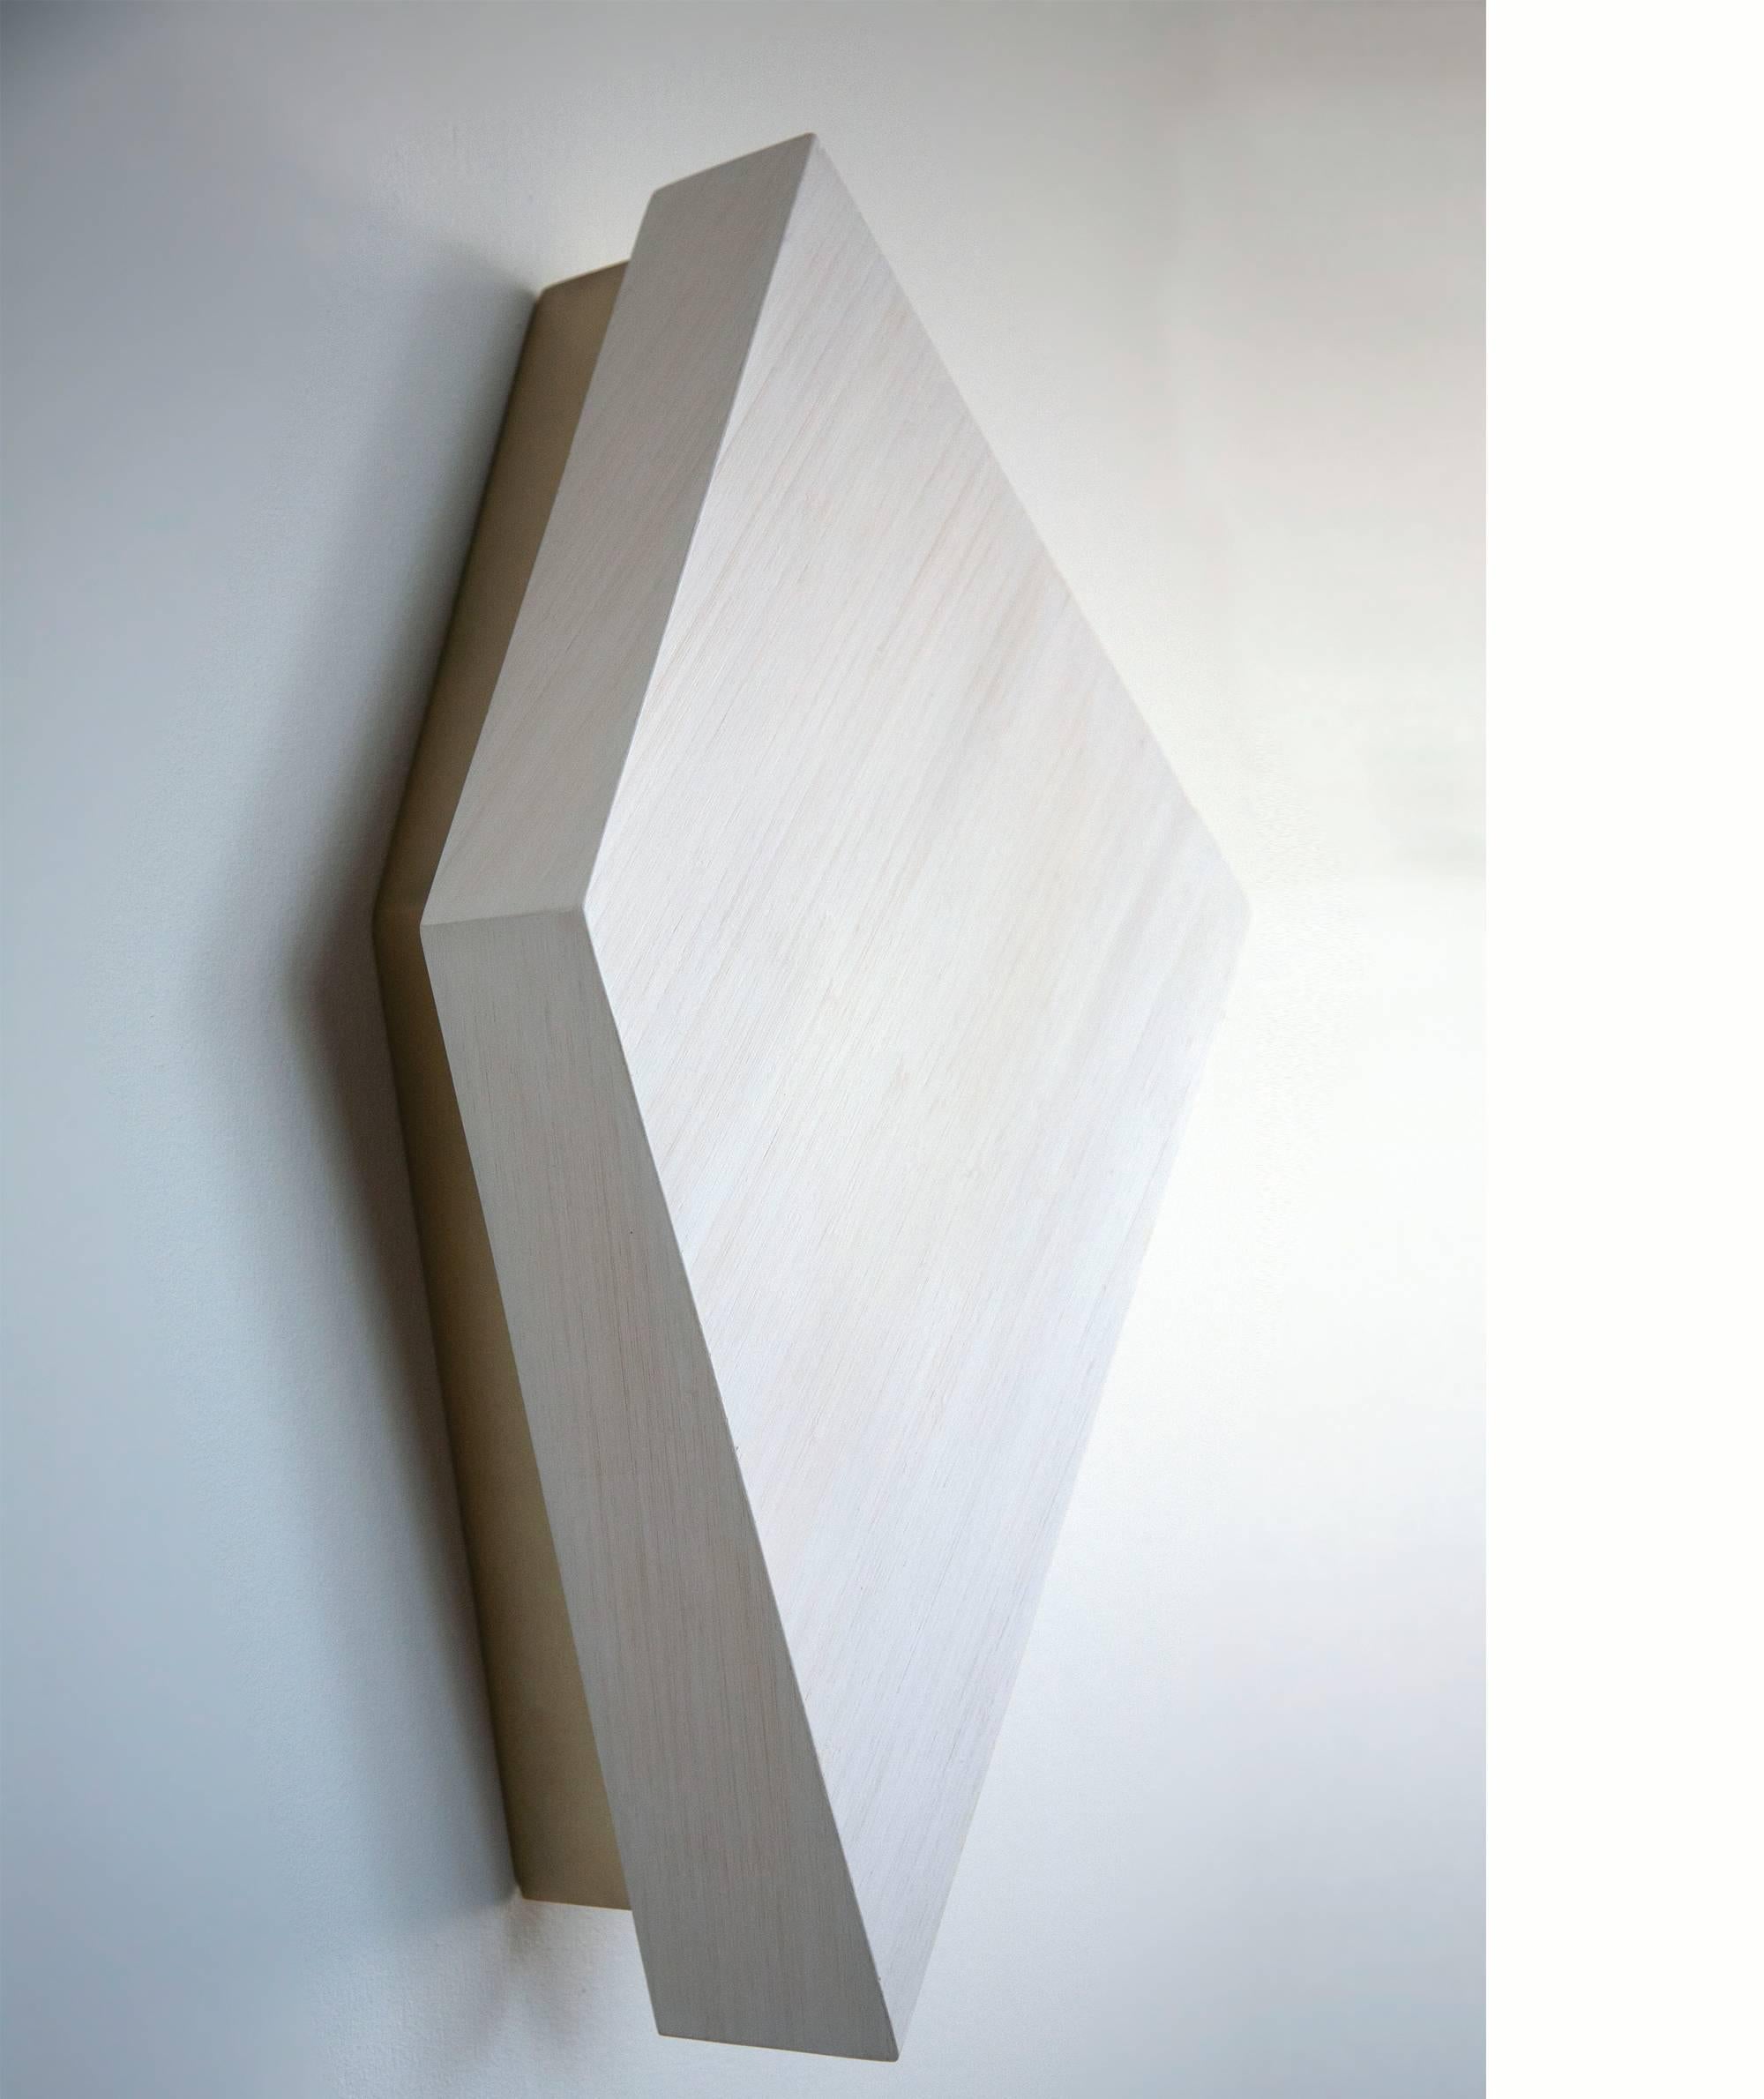 This geometric, wall-mounted sconce appears to go from solid object when off, to glowing wall washer when on. These can be mounted in any direction around the central mounting point. They stand alone on a wall, in pairs, or groups. Arranging them